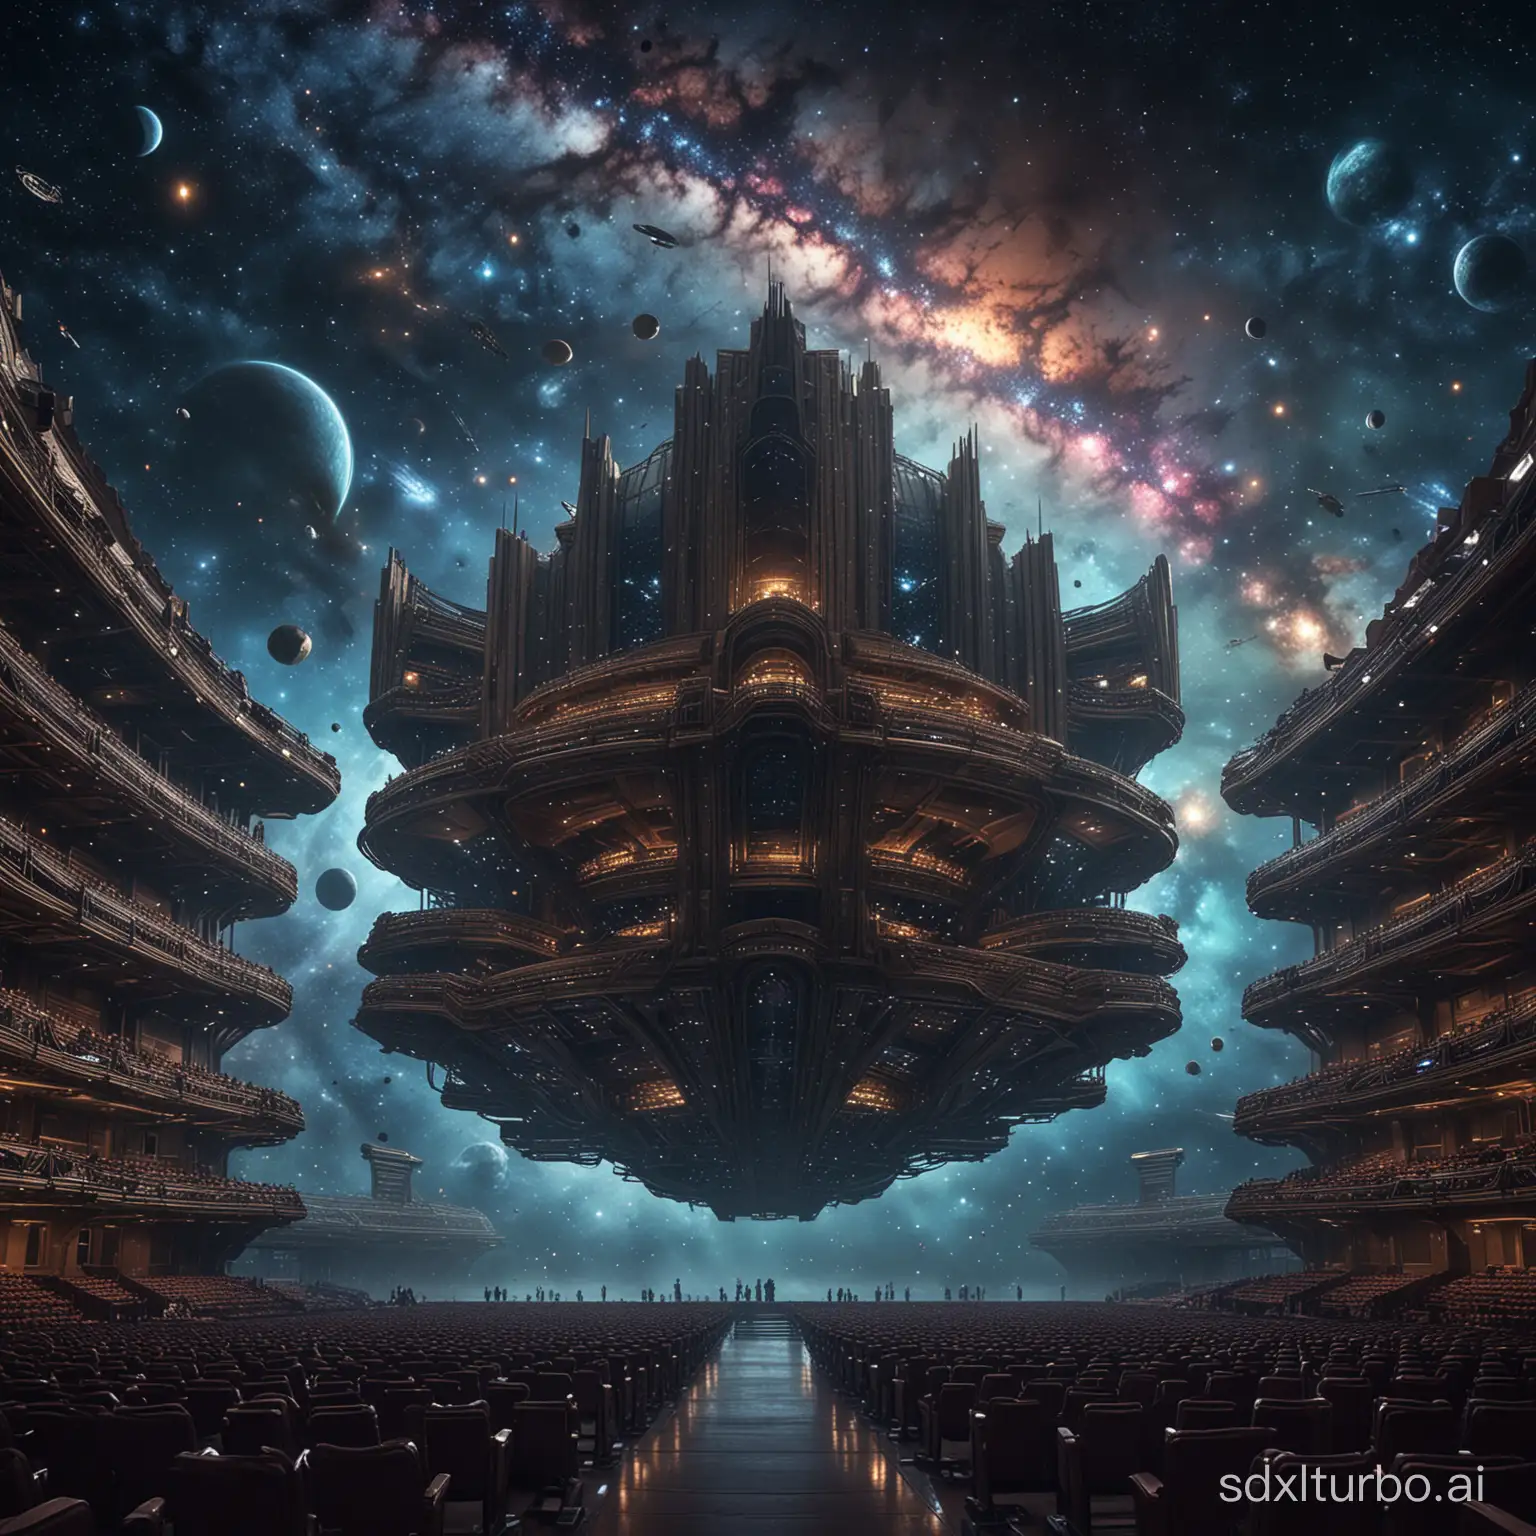 A sci-fi scene featuring a large opera house surrounded by galaxies and stars, adding depth to the setting with fantastical elements. High resolution.